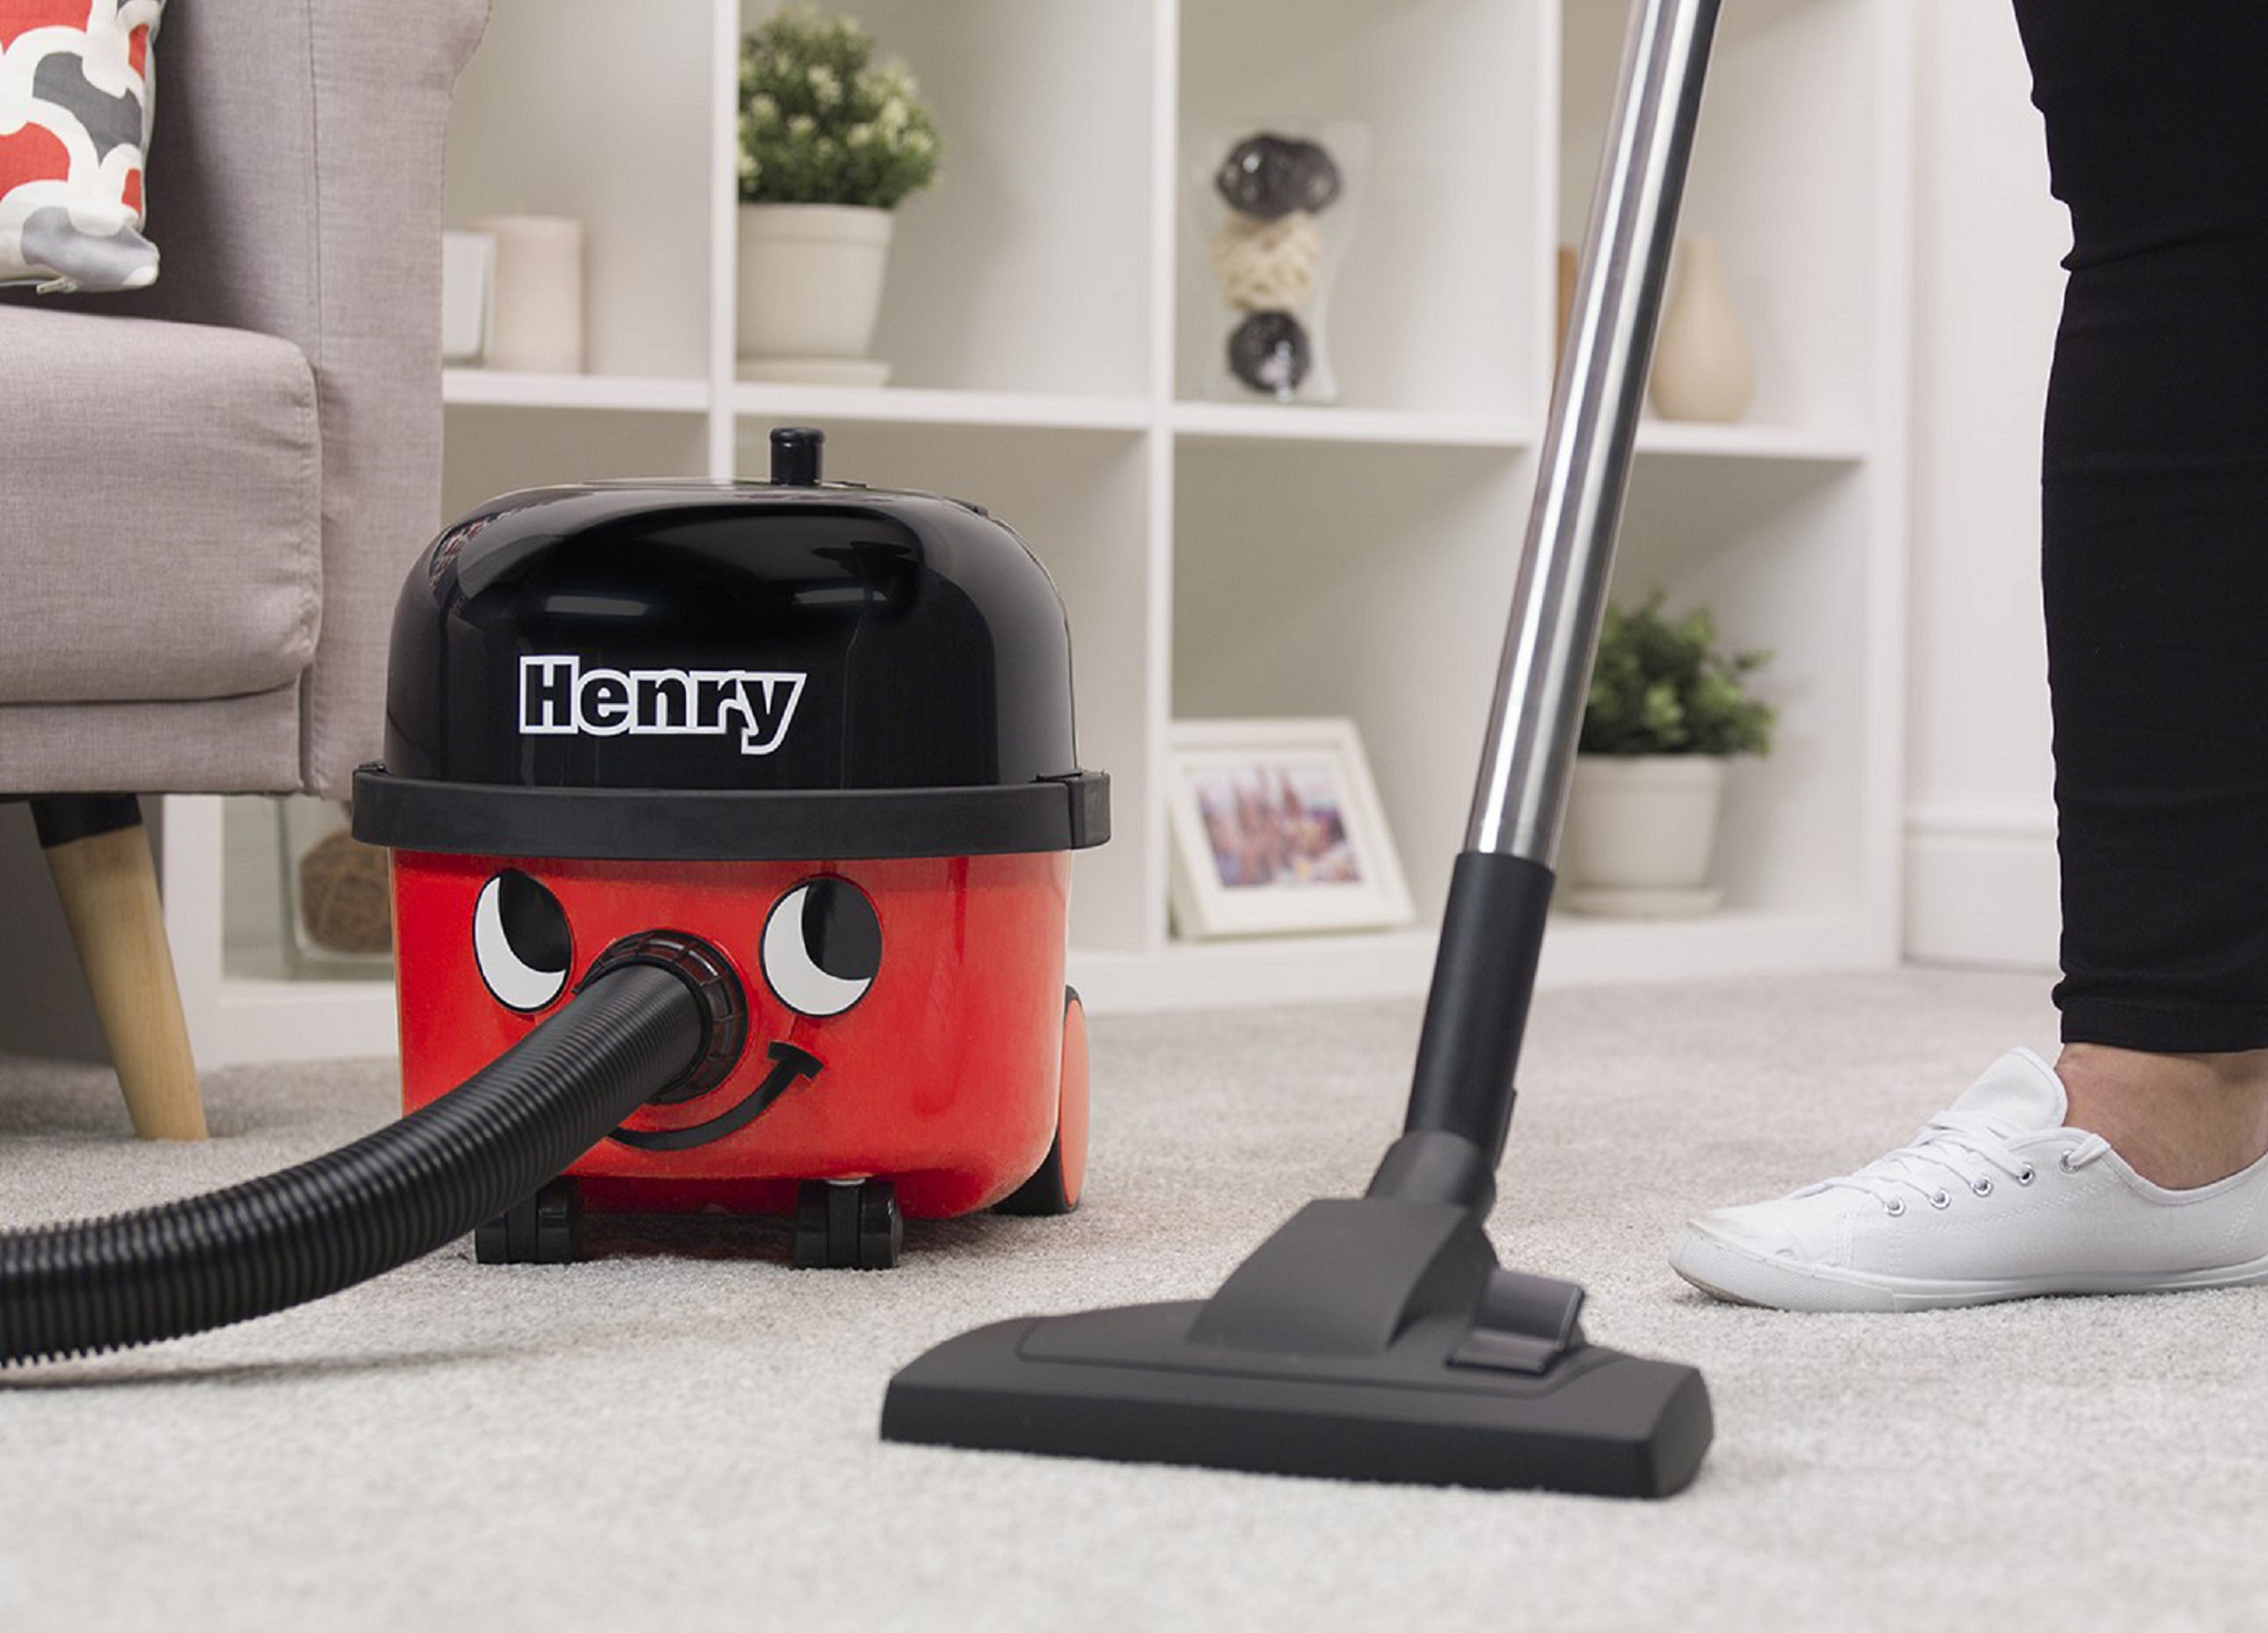 tvetydig terrorist Hvornår Cheap vacuum cleaners which are more affordable than Dyson | TechRadar